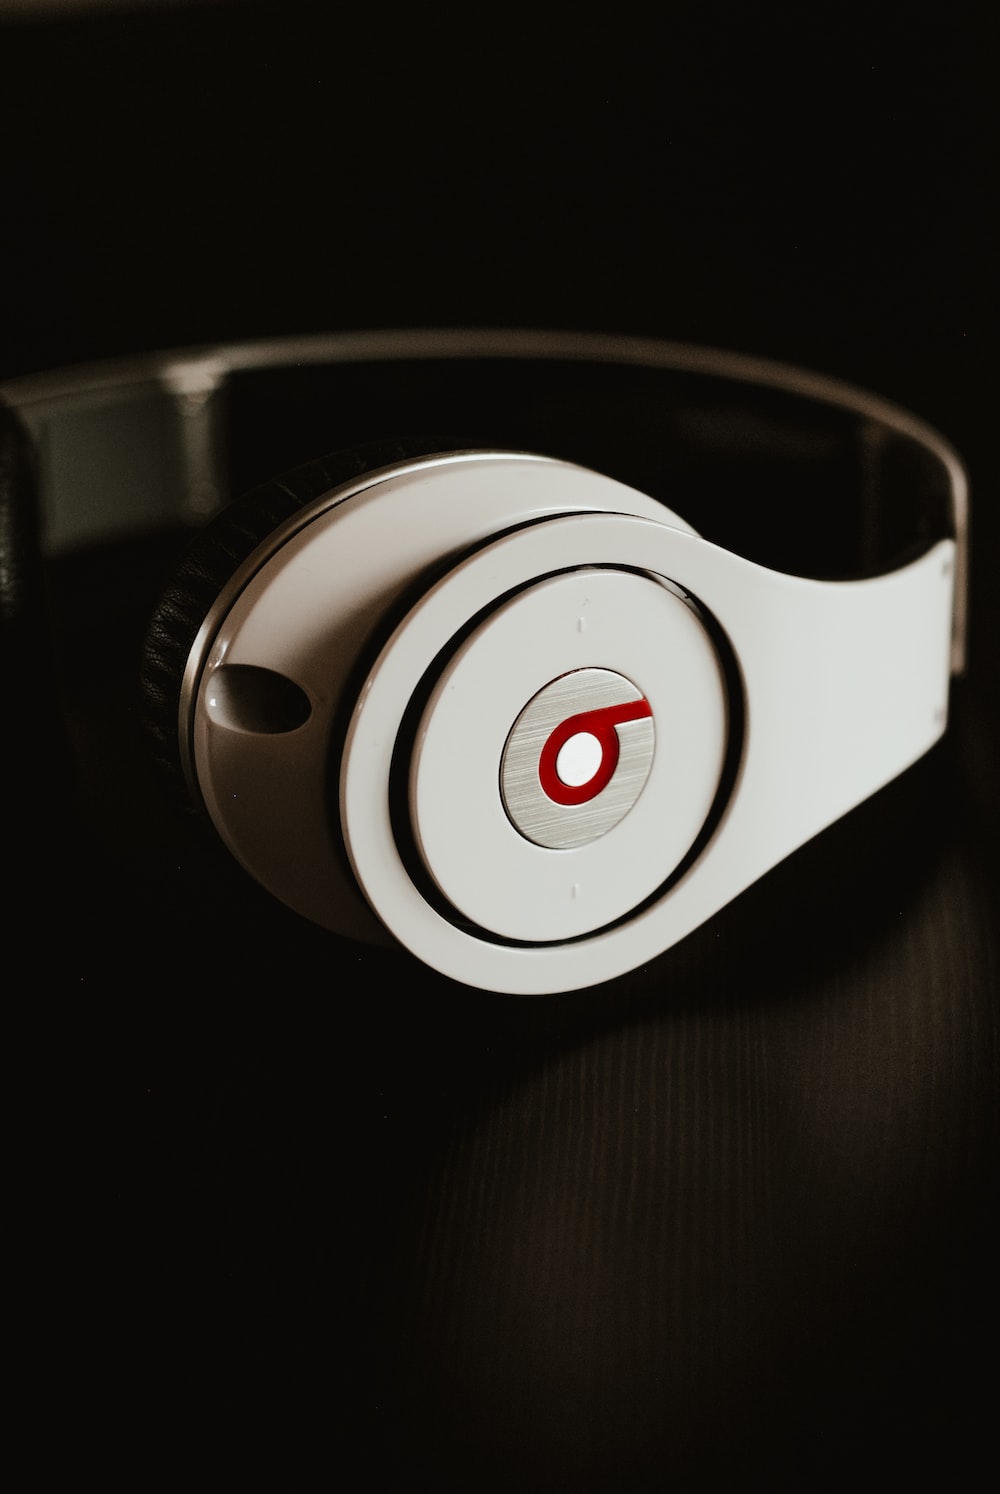 white Beats by Dr. Dre Wireless headphones